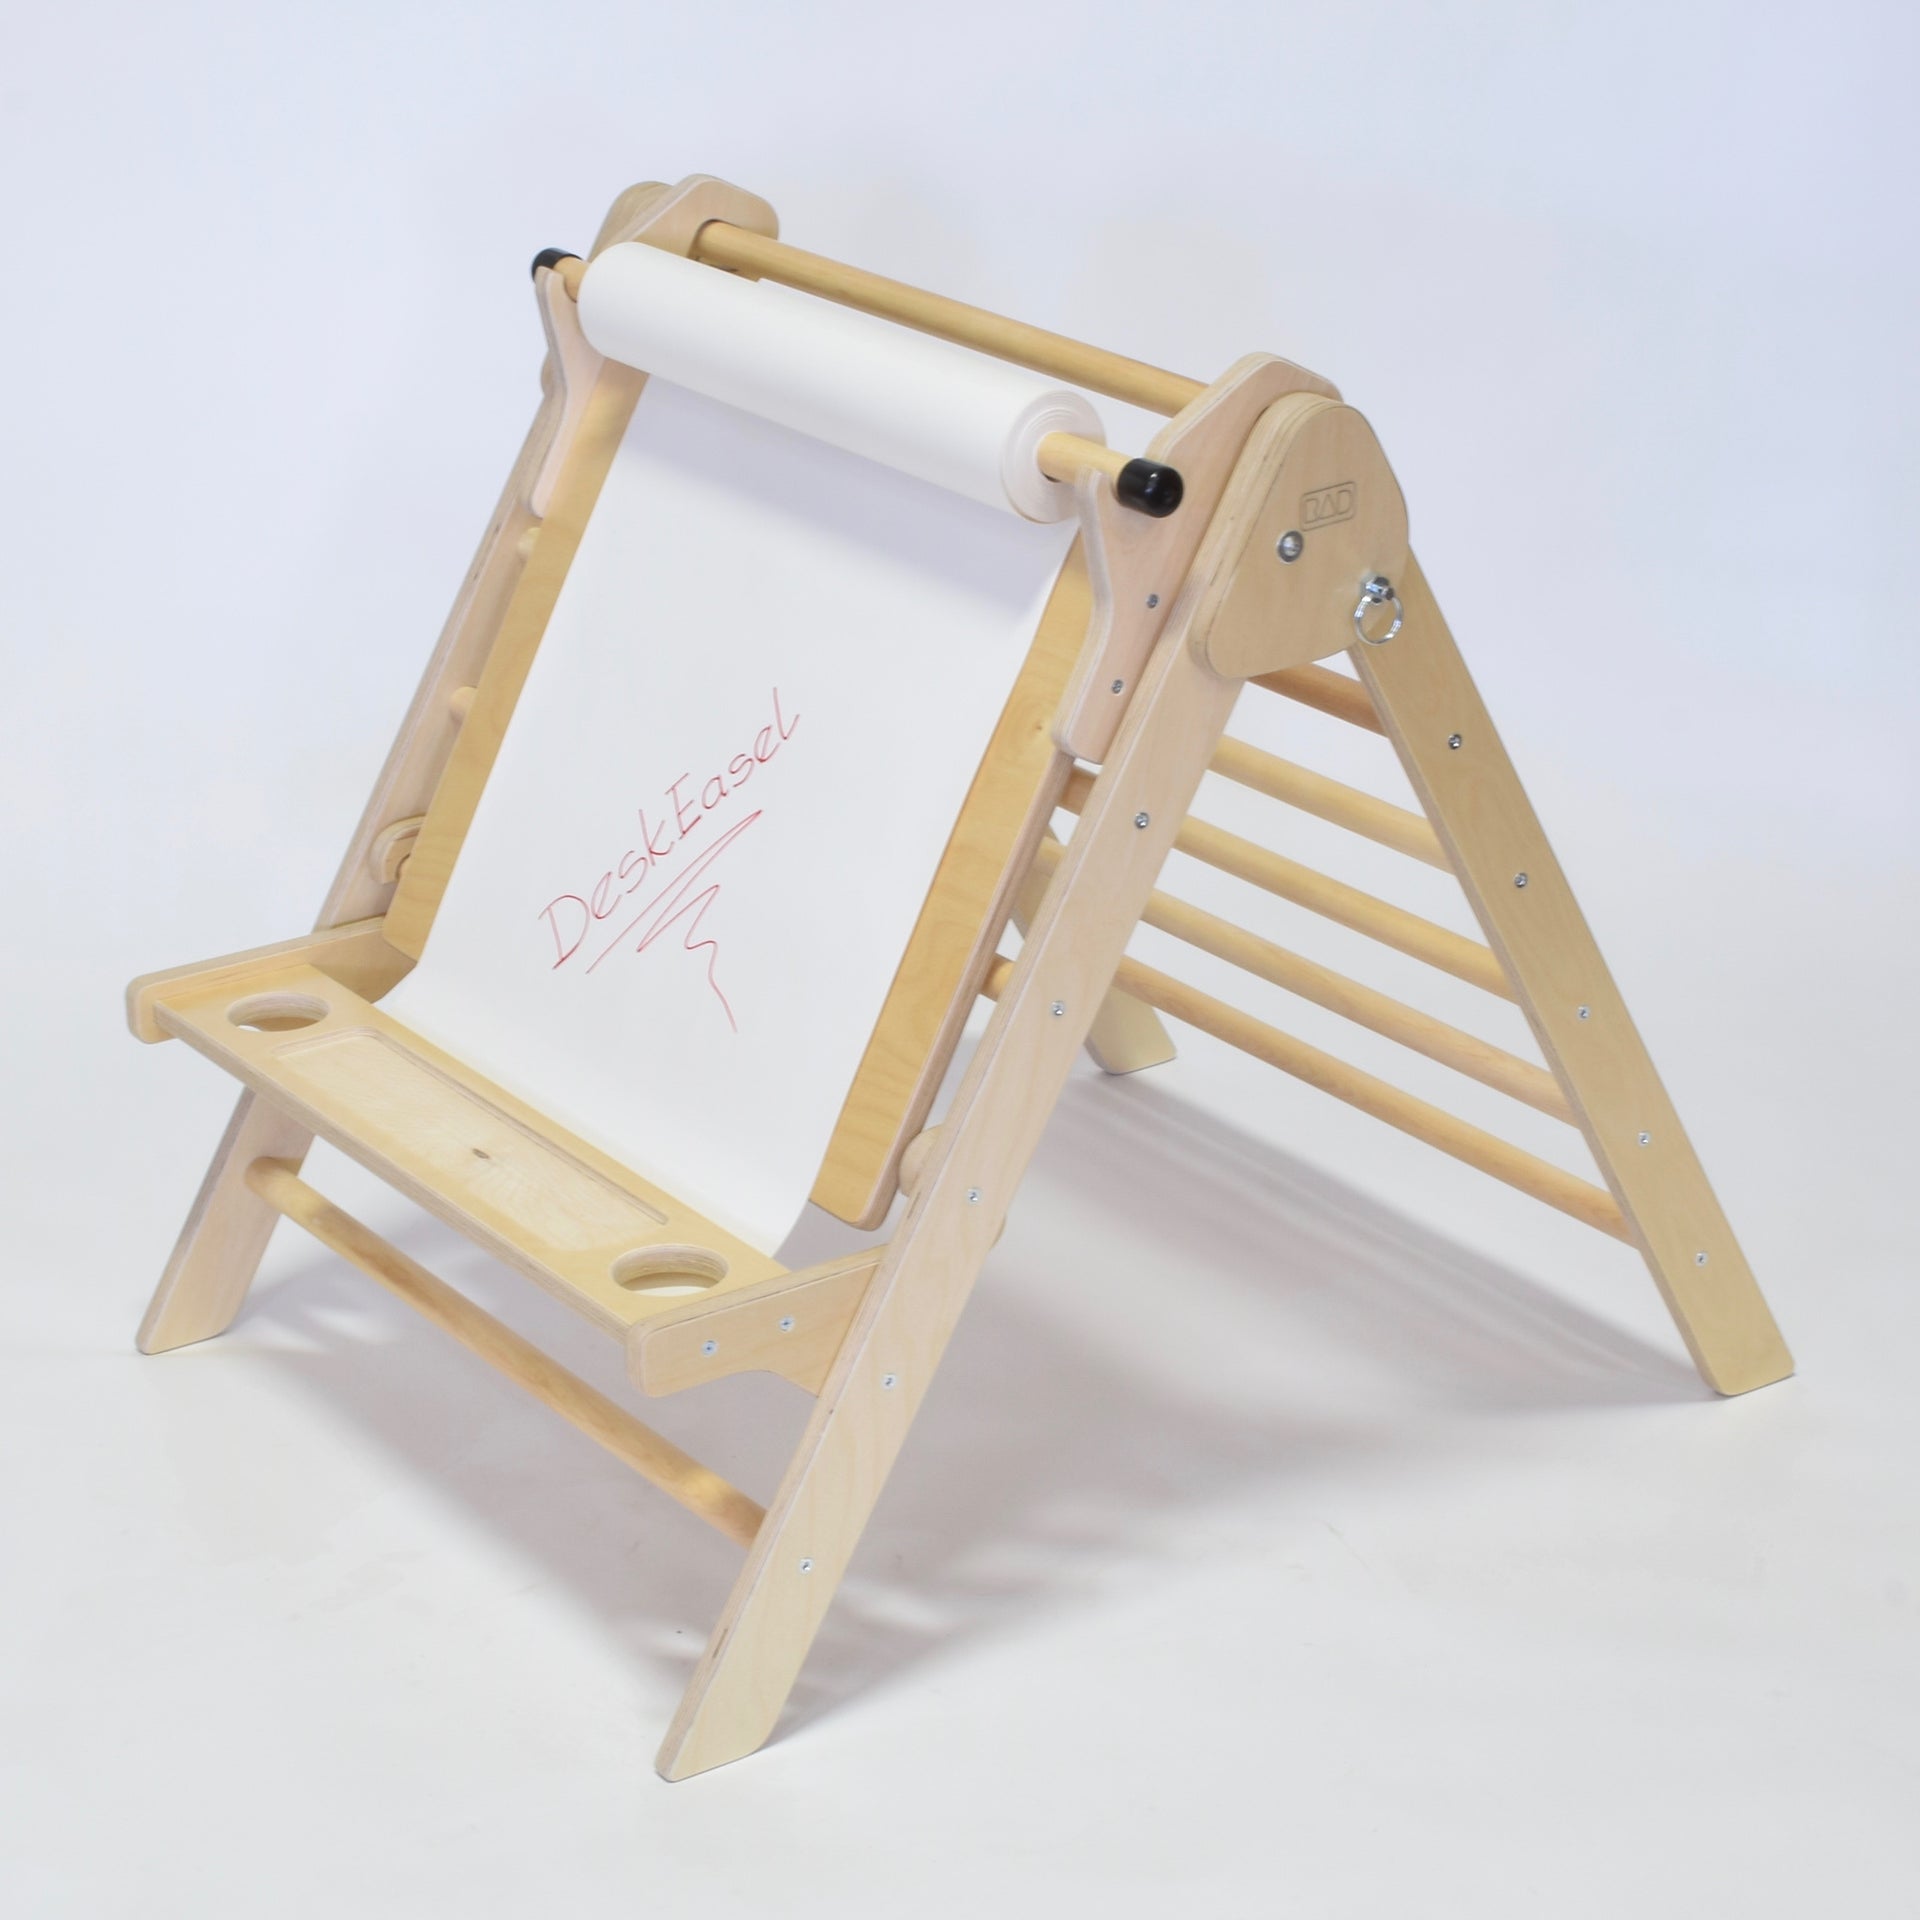 Guidecraft Wooden Tabletop Easel in Multicolor FREE SHIPPING